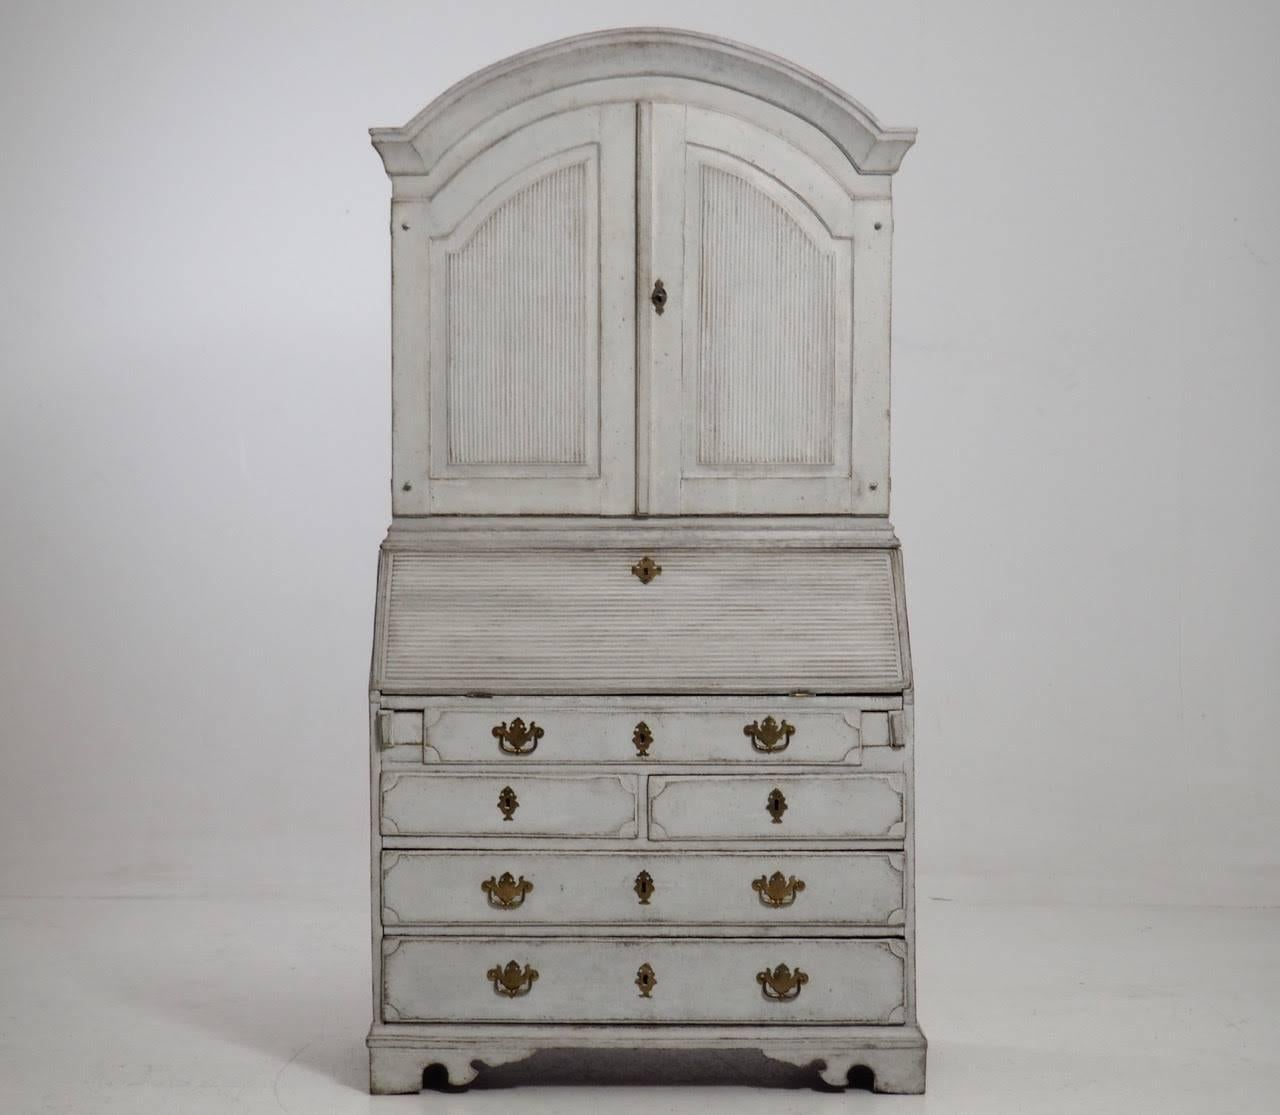 This is an exquisite Swedish Gustavian period painted secretary with library and original brass hardware and locks, circa 1780. The upper section has three shelves, the top shaped and slotted for spoons, behind door fronts carved with reeded panels.